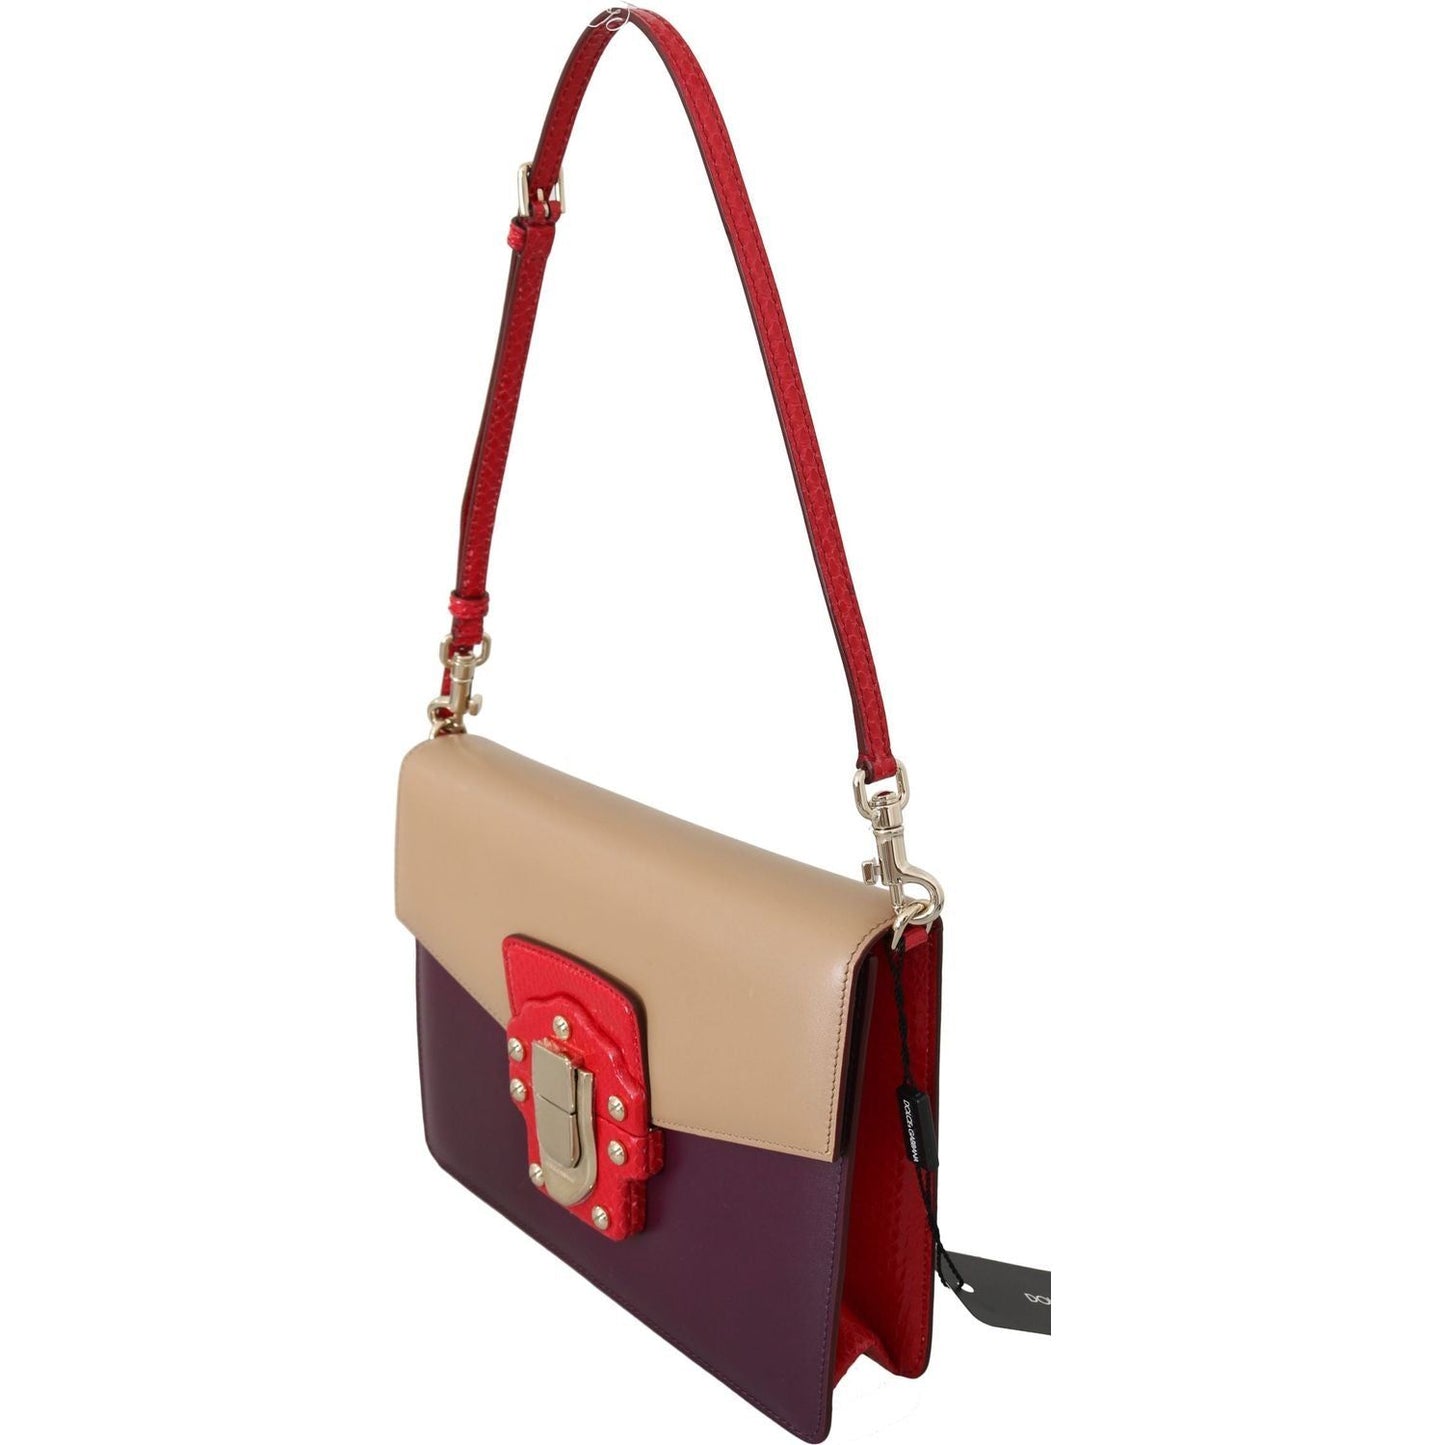 Dolce & Gabbana Exquisite LUCIA Leather Shoulder Bag Purse purple-beige-red-leather-crossbody-purse-bag IMG_0374-2-scaled-6783ffb1-76b.jpg